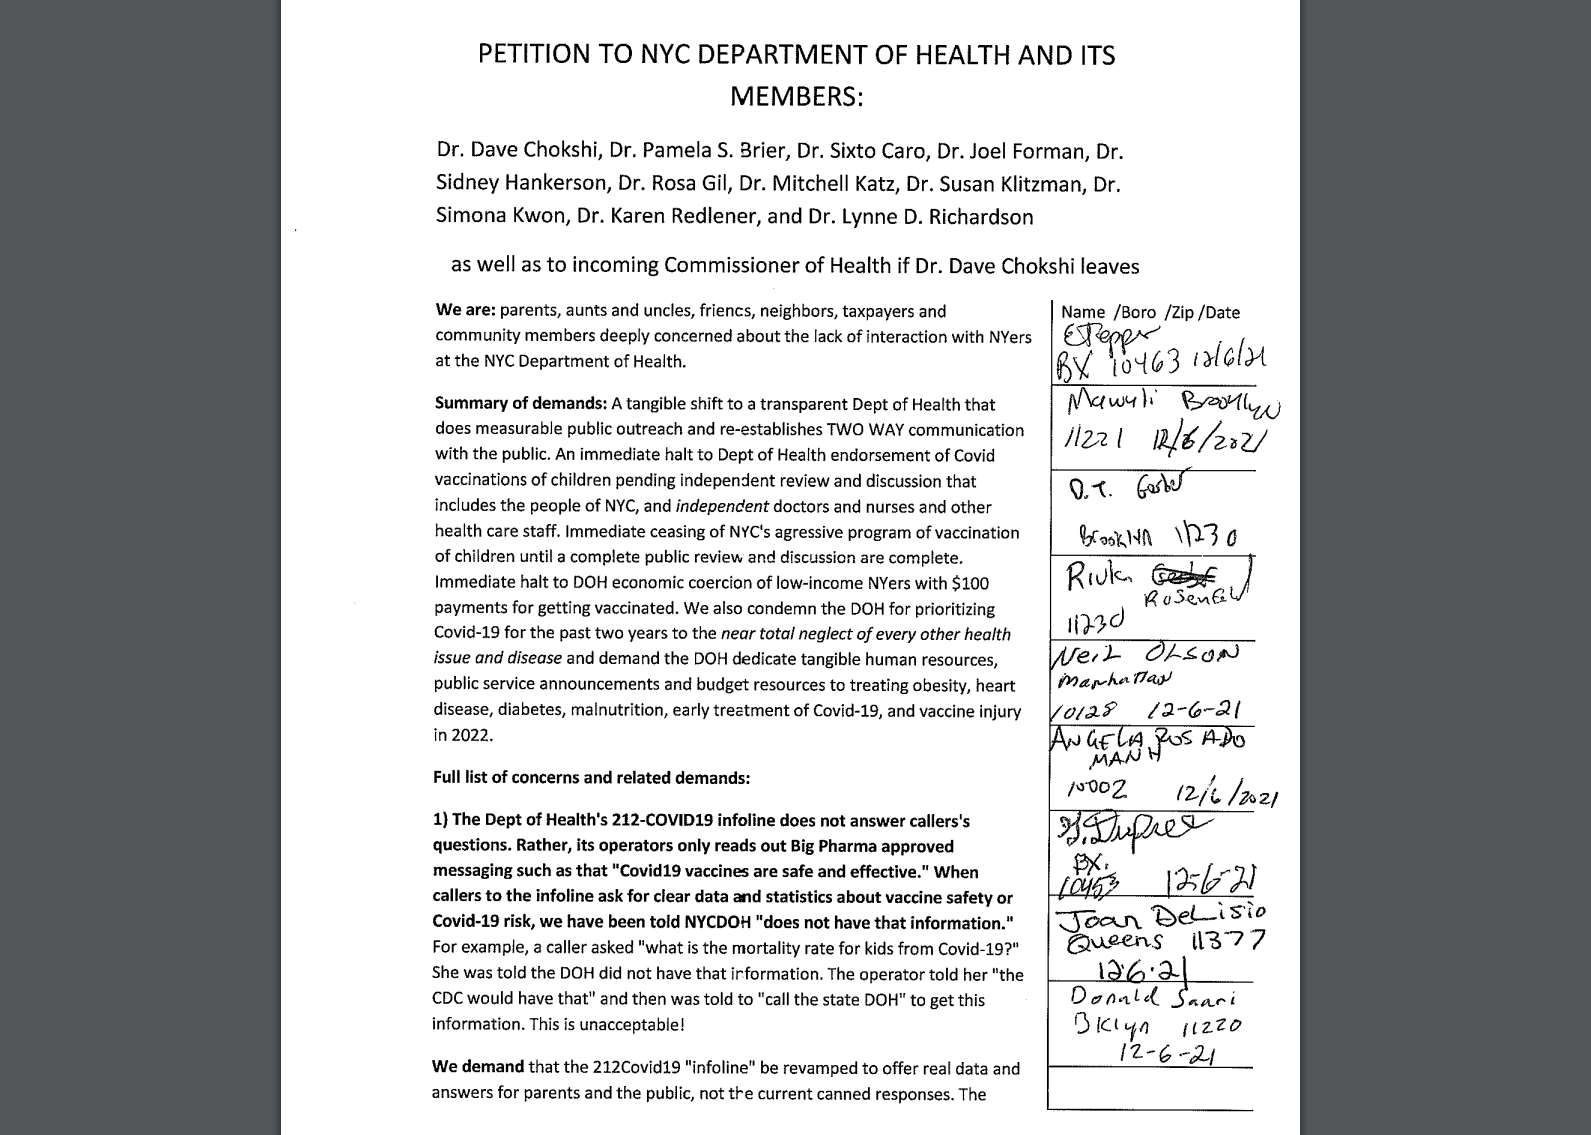 NYC Department of Health Petition